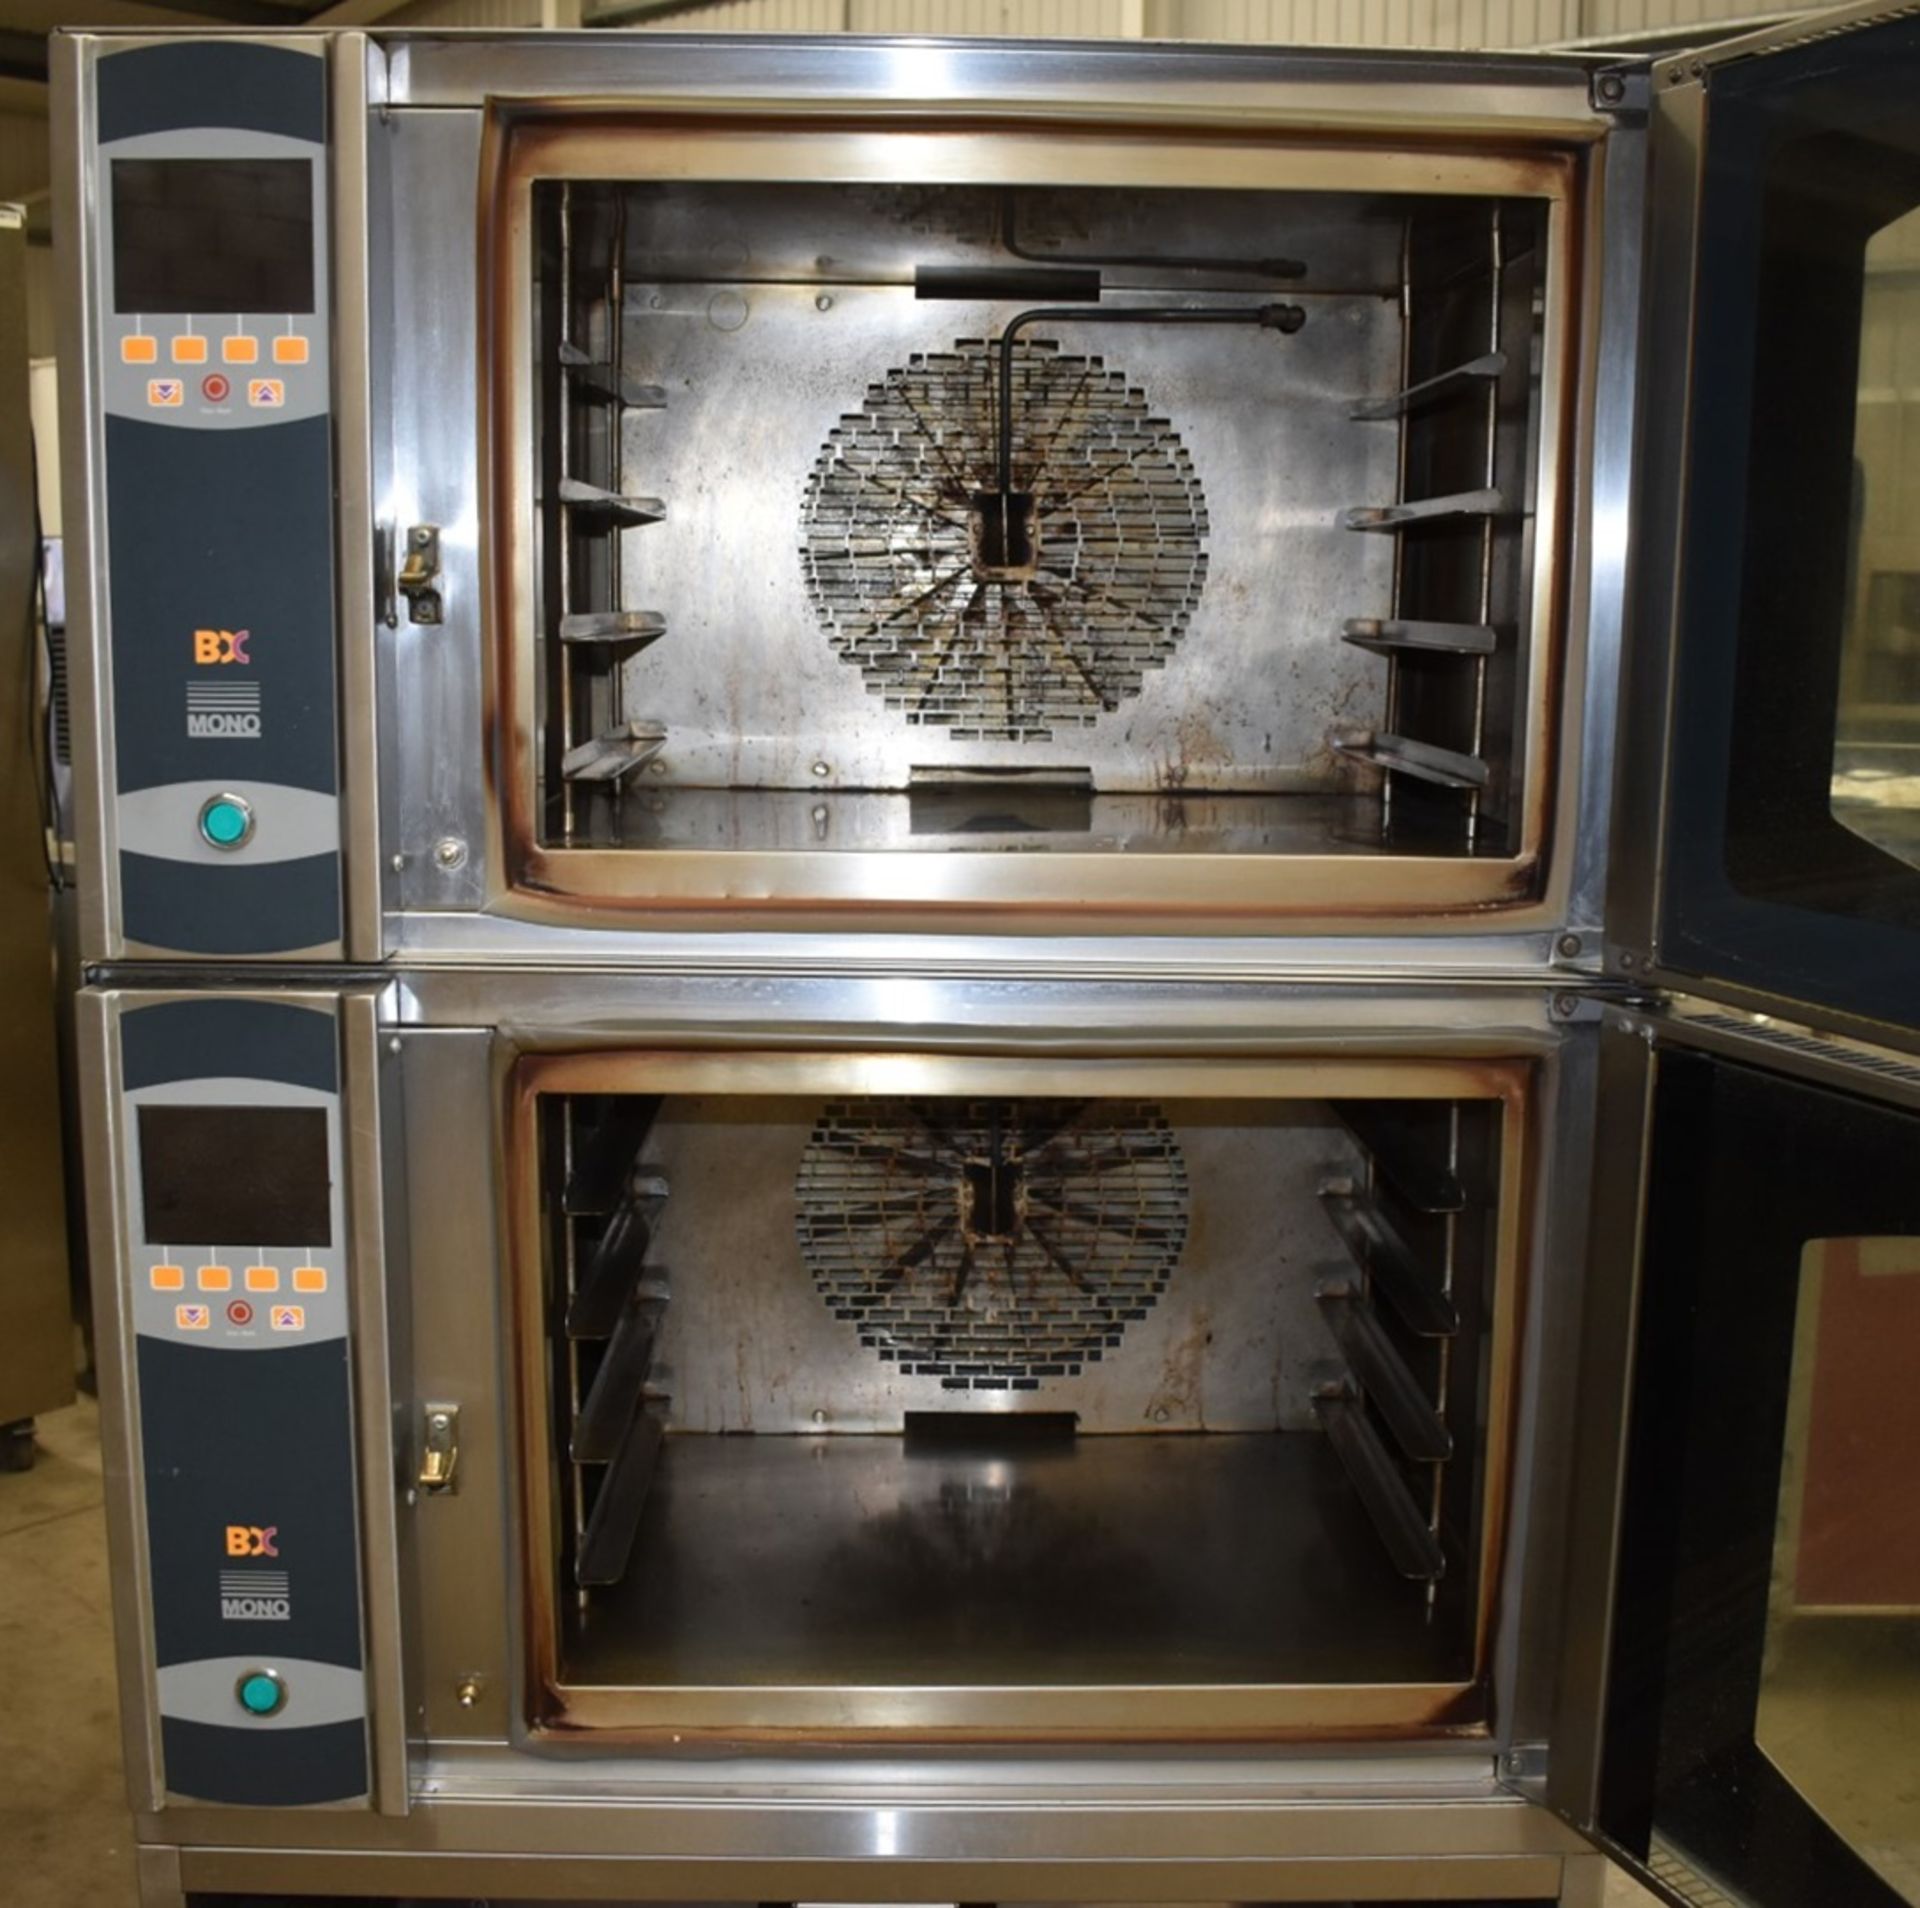 1 x Mono FG158 Double Commercial Bakery Convection Oven - 3 Phase - Ex M&S - H180 x W100 x D85 cms - - Image 8 of 10